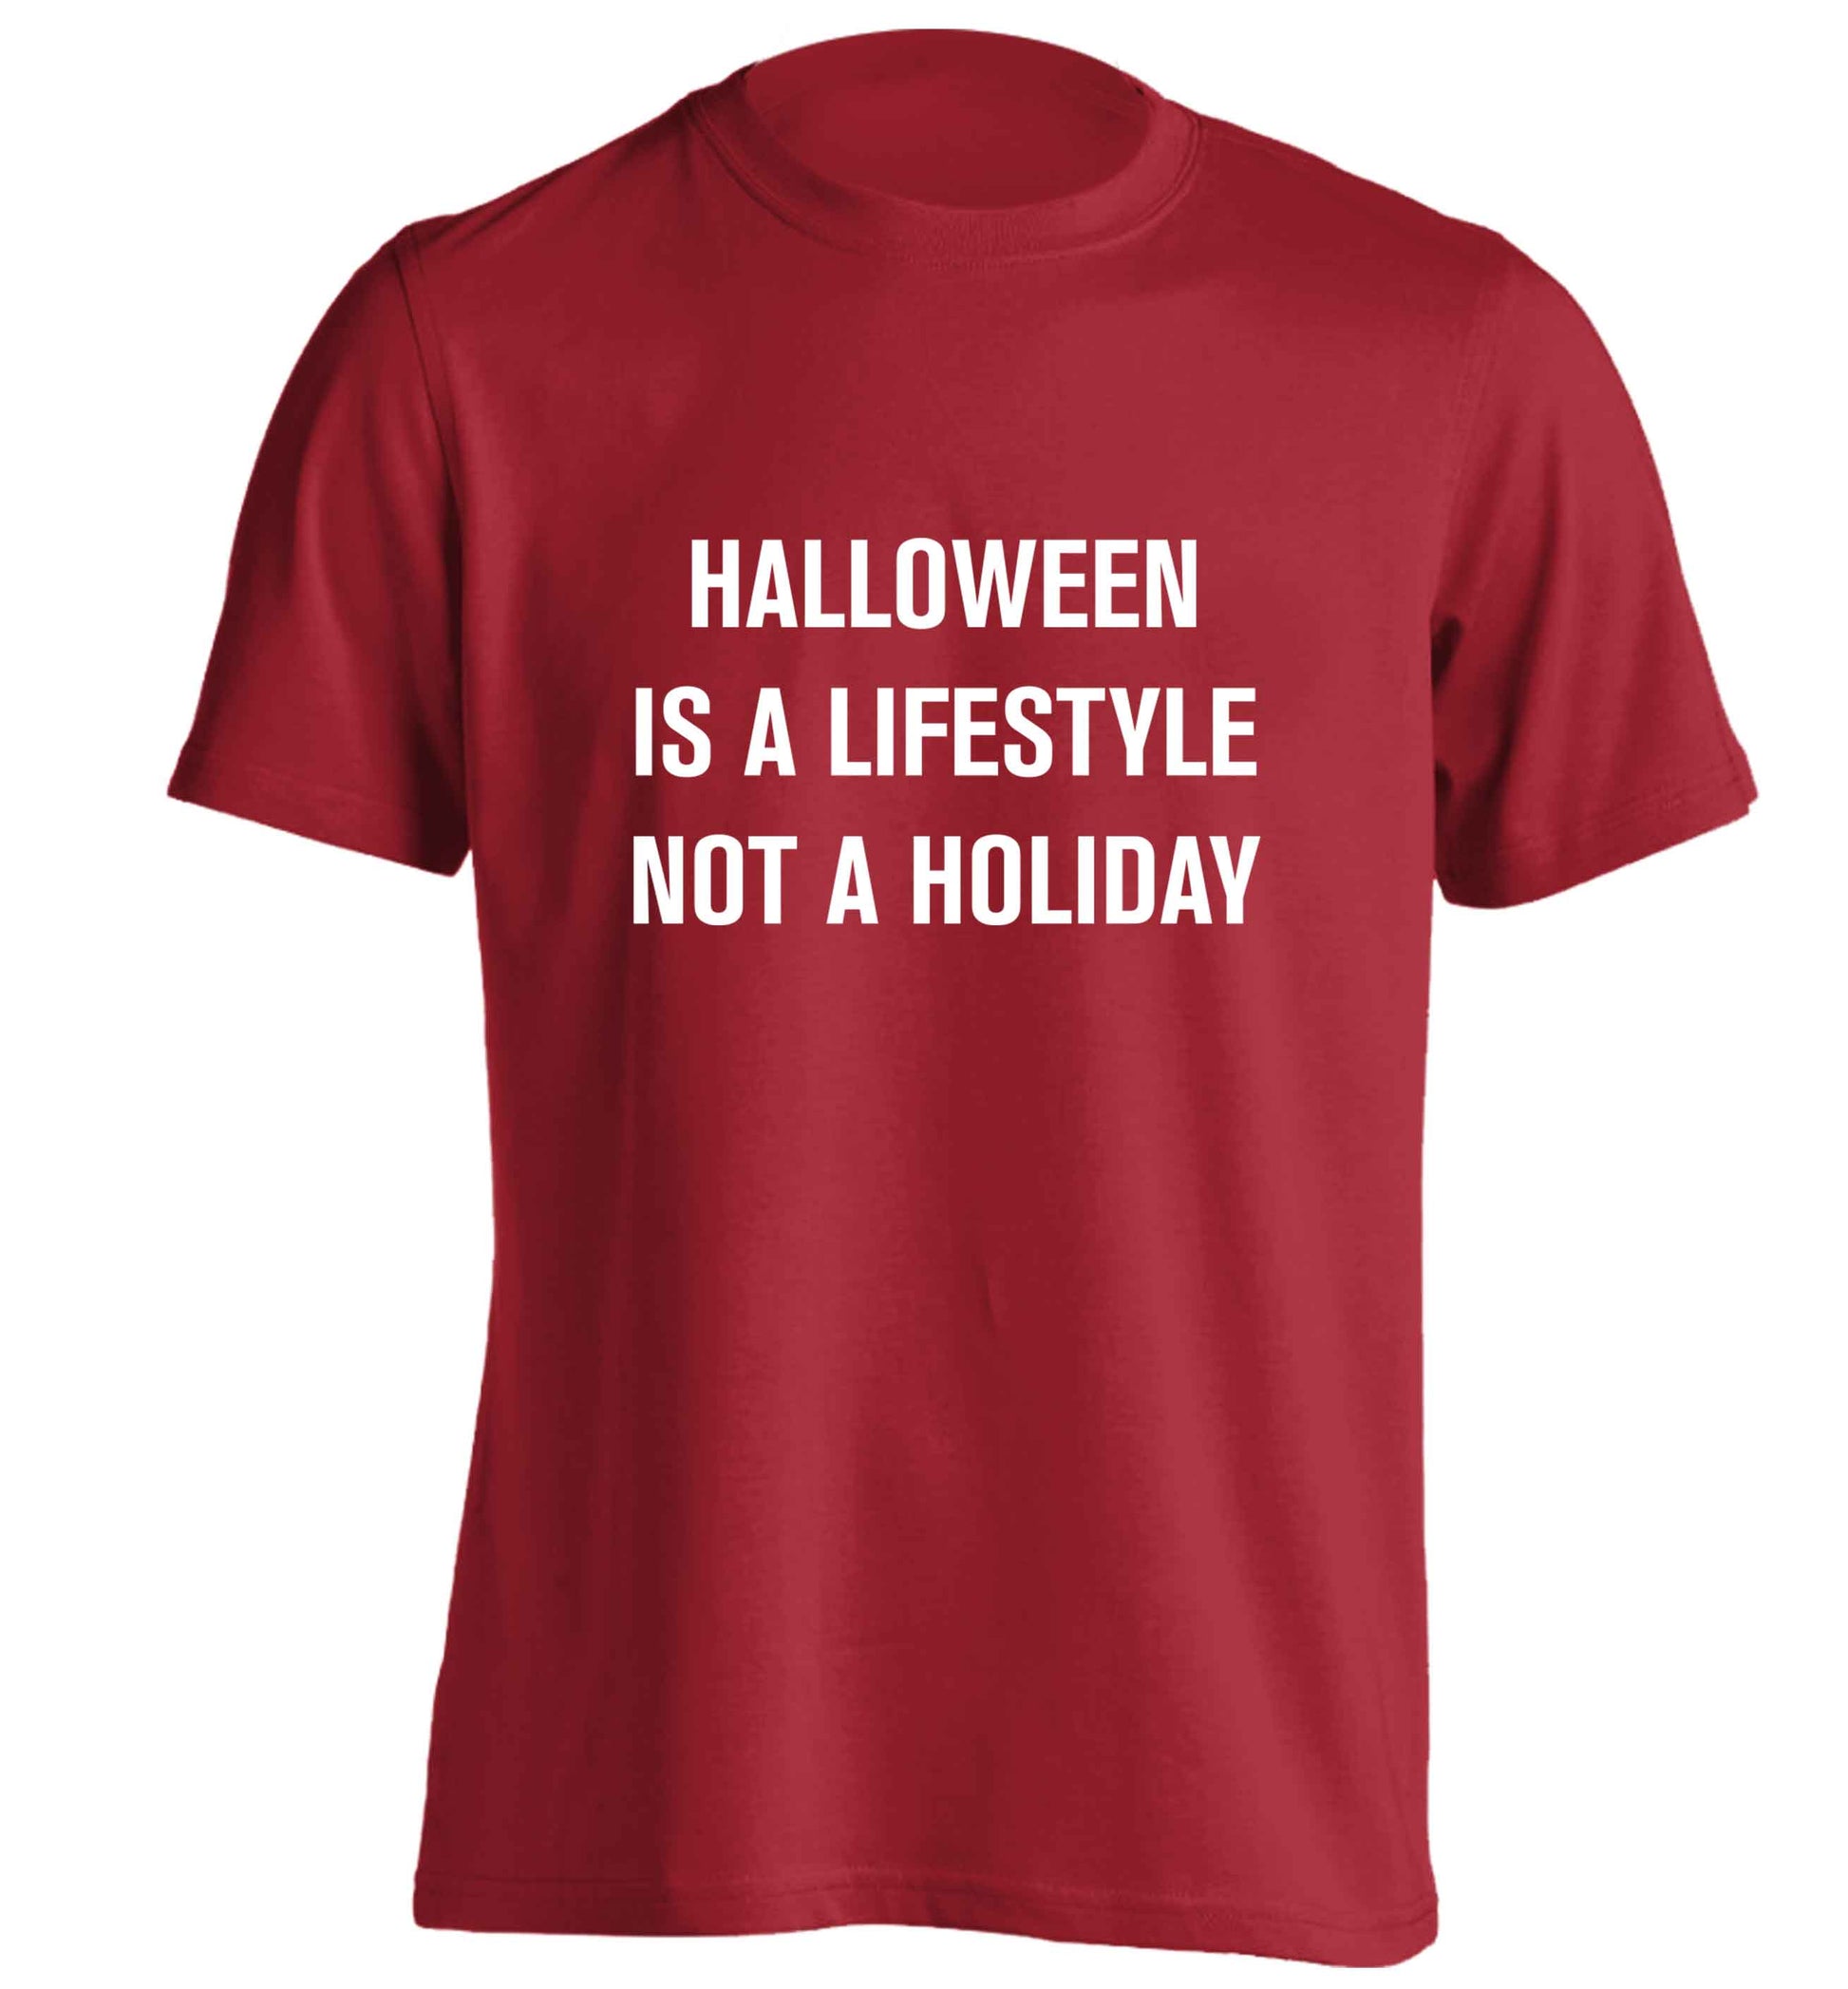 Halloween is a lifestyle not a holiday adults unisex red Tshirt 2XL